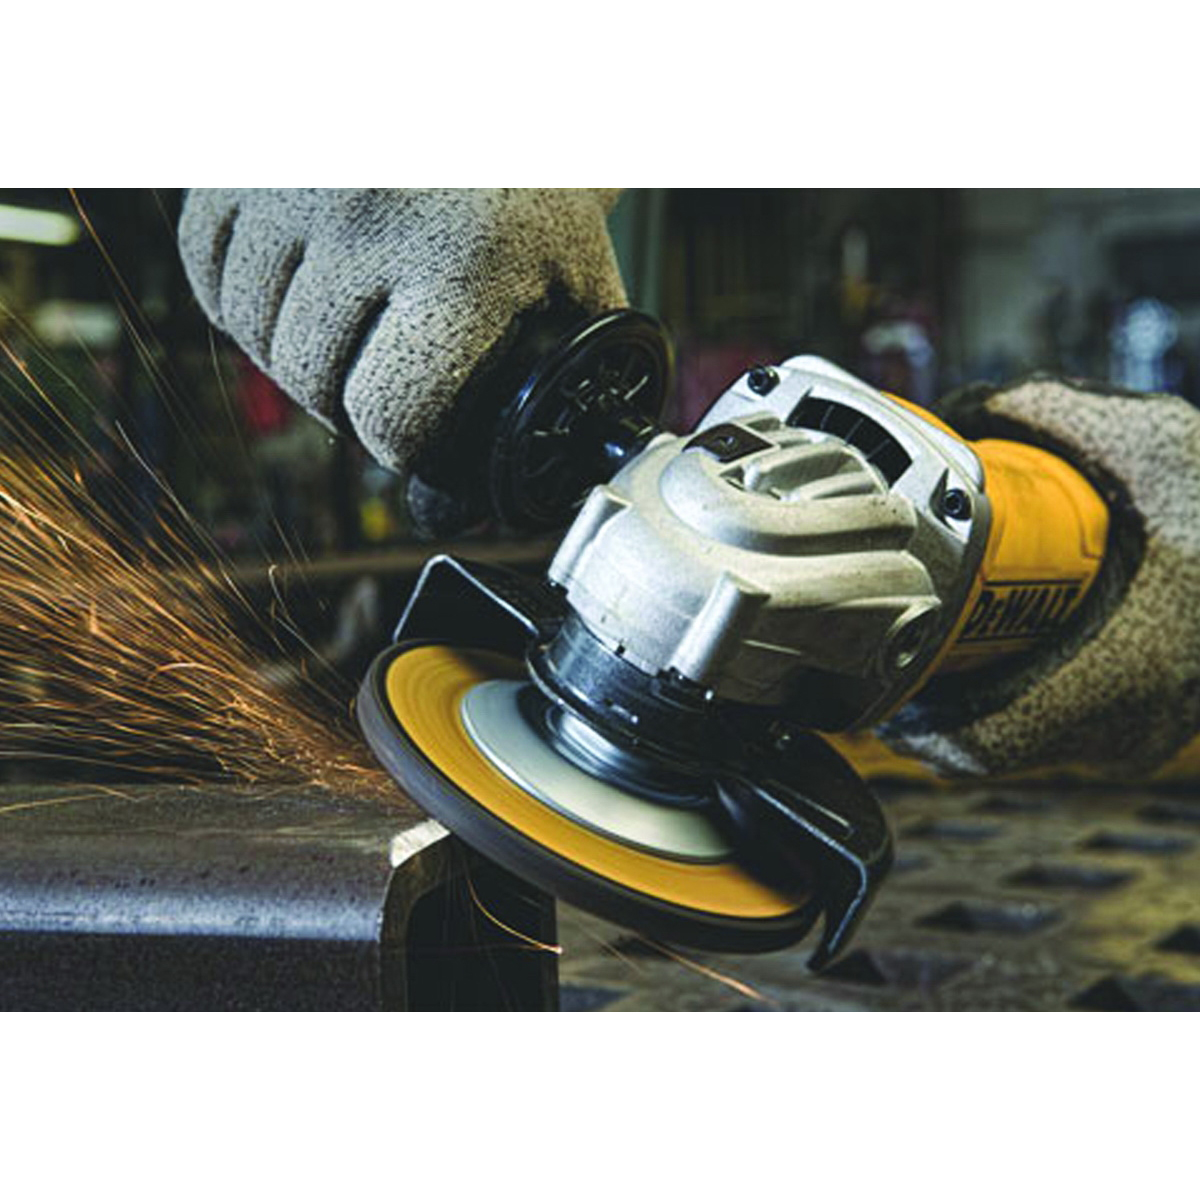 DeWALT DWE402 Small Angle Grinder, 11 A, 5/8-11 Spindle, 4-1/2 in Dia Wheel, 11,000 rpm Speed - 3